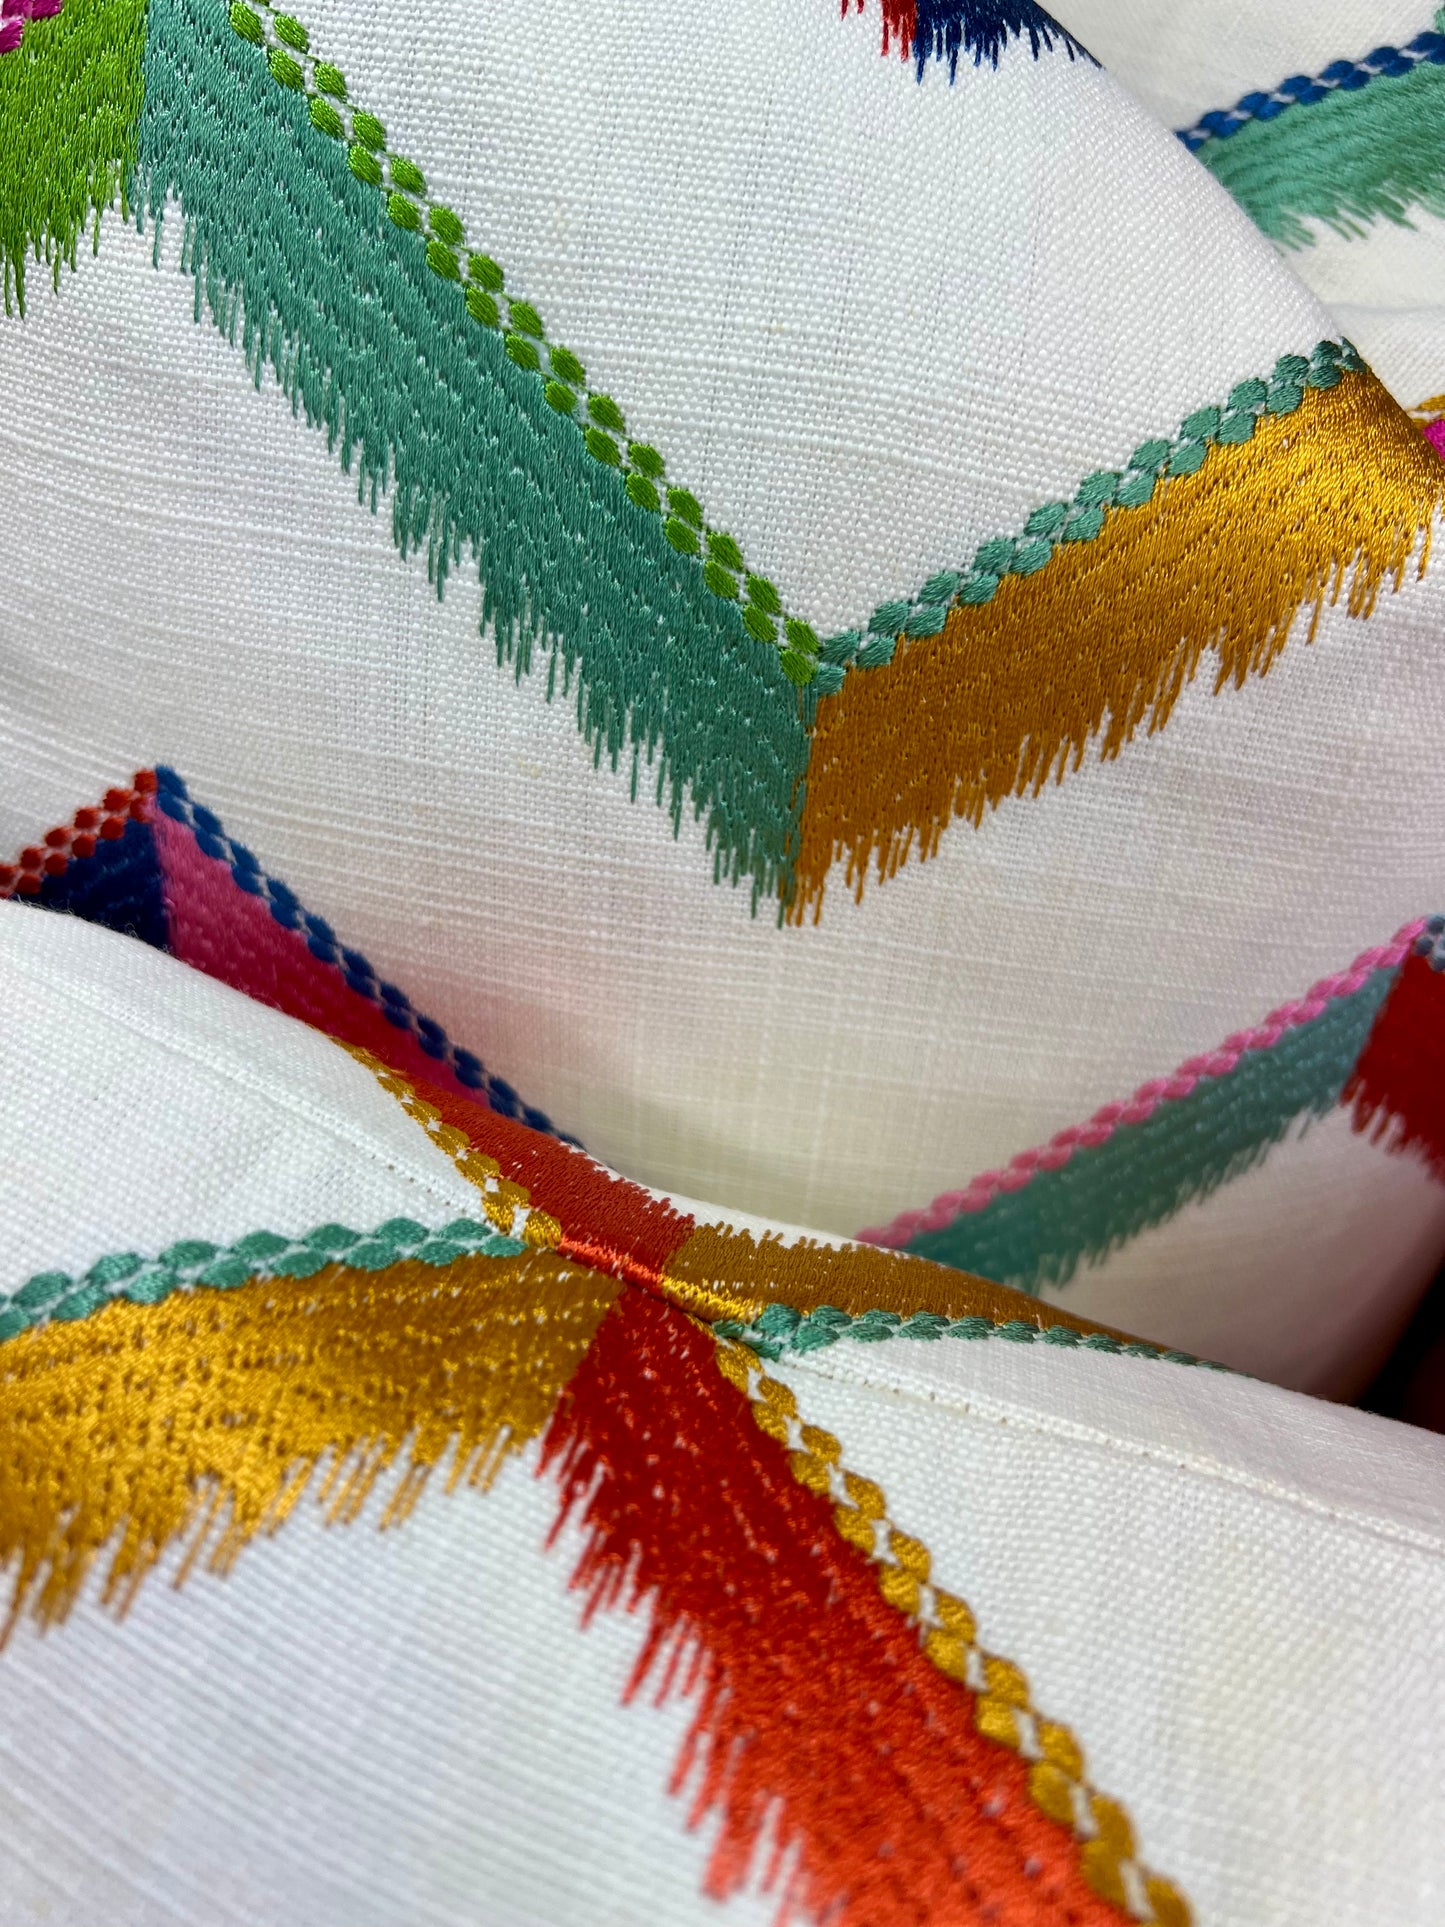 Luxury Pillow -  24" x 24" - Chevron Confetti; Bright embroidered chevrons of pinks, greens blues, golds and oranges on a white linen textured background